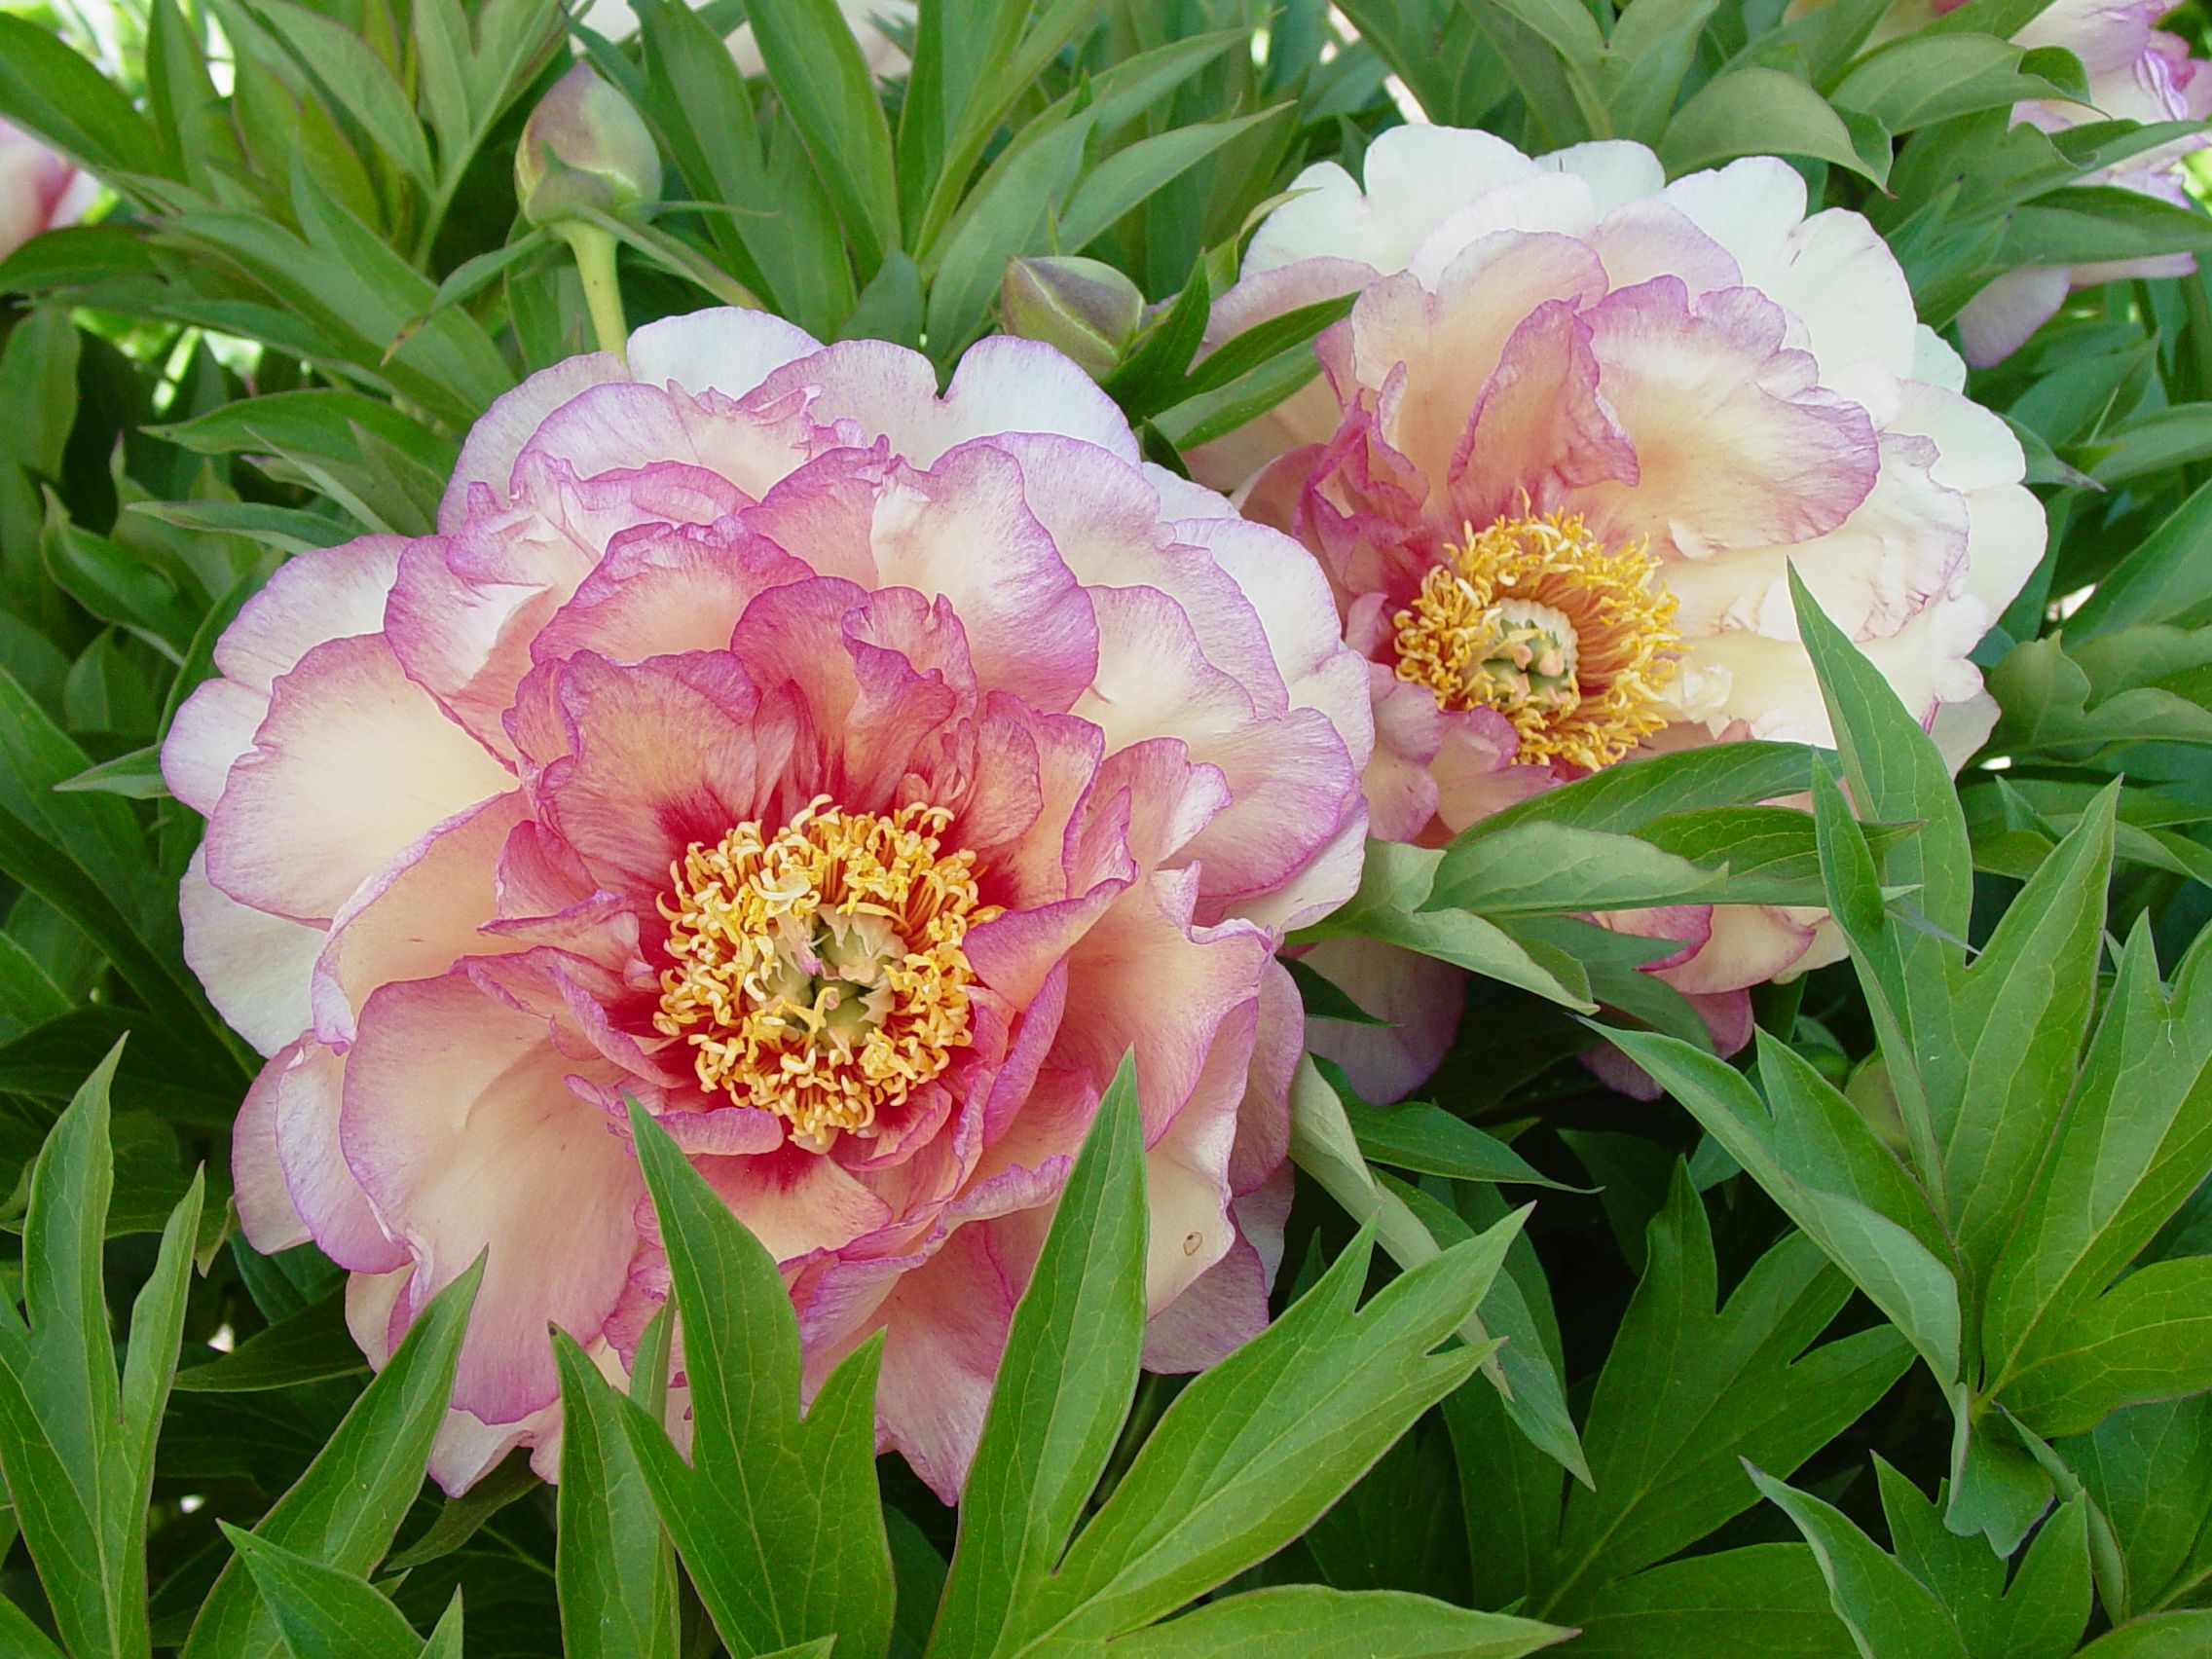 images/plants/paeonia/pae-truly-scrumptious/pae-truly-scrumptious-0012.JPG